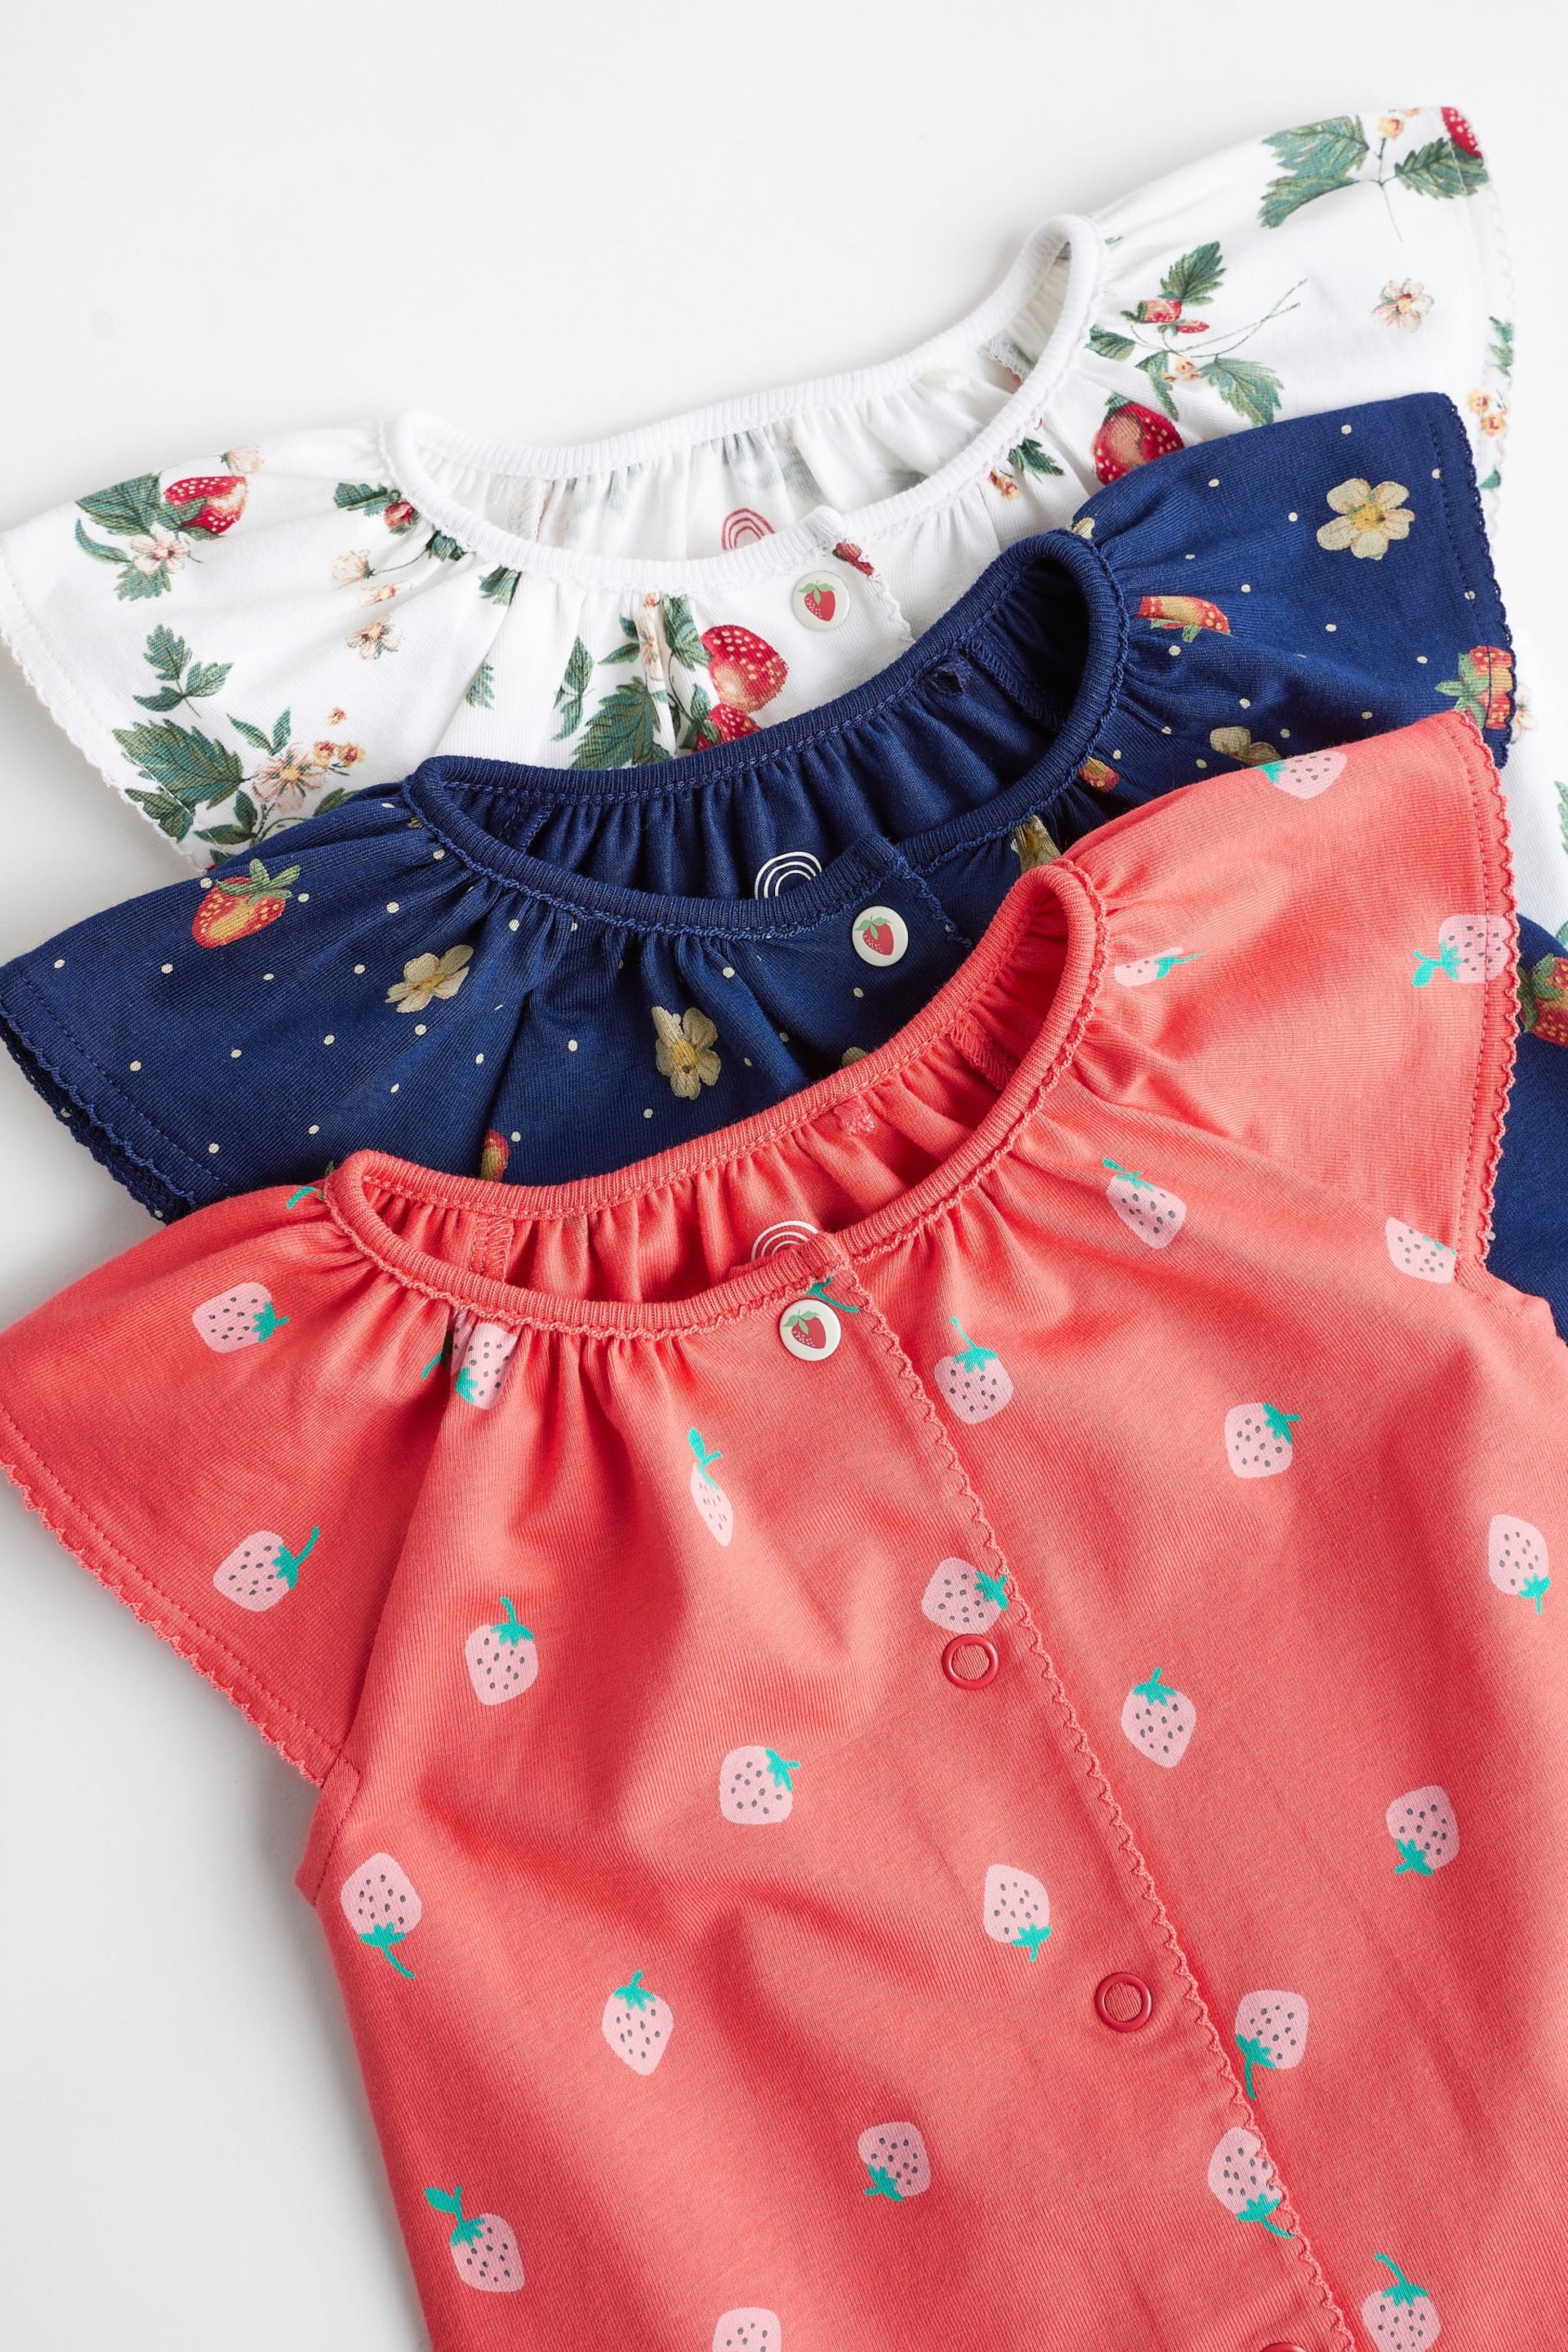 White/Blue/Red Strawberry Baby Rompers 3 Pack - Image 4 of 9